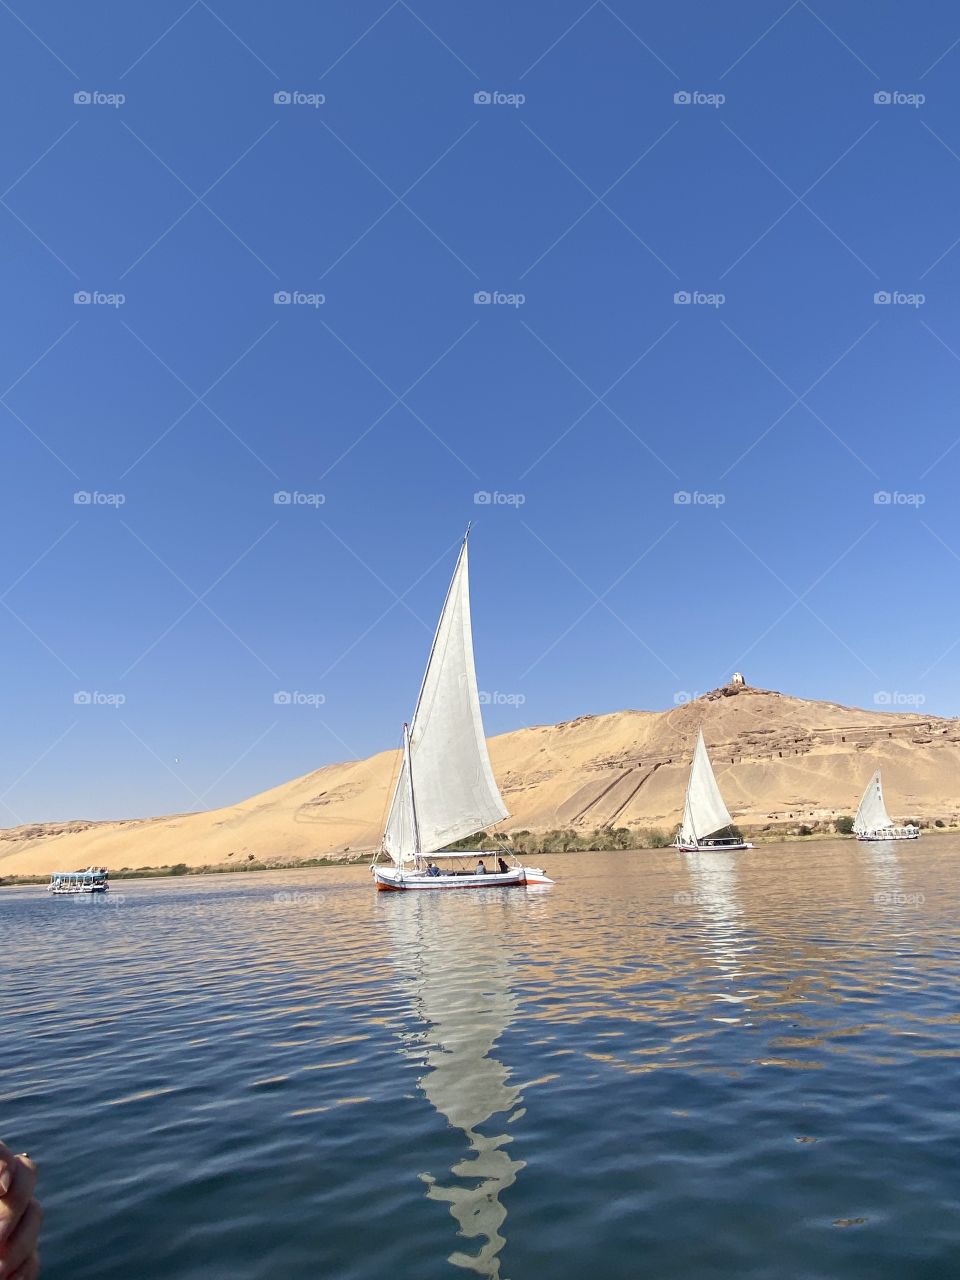 Sailboats in the Nile River, Egypt 